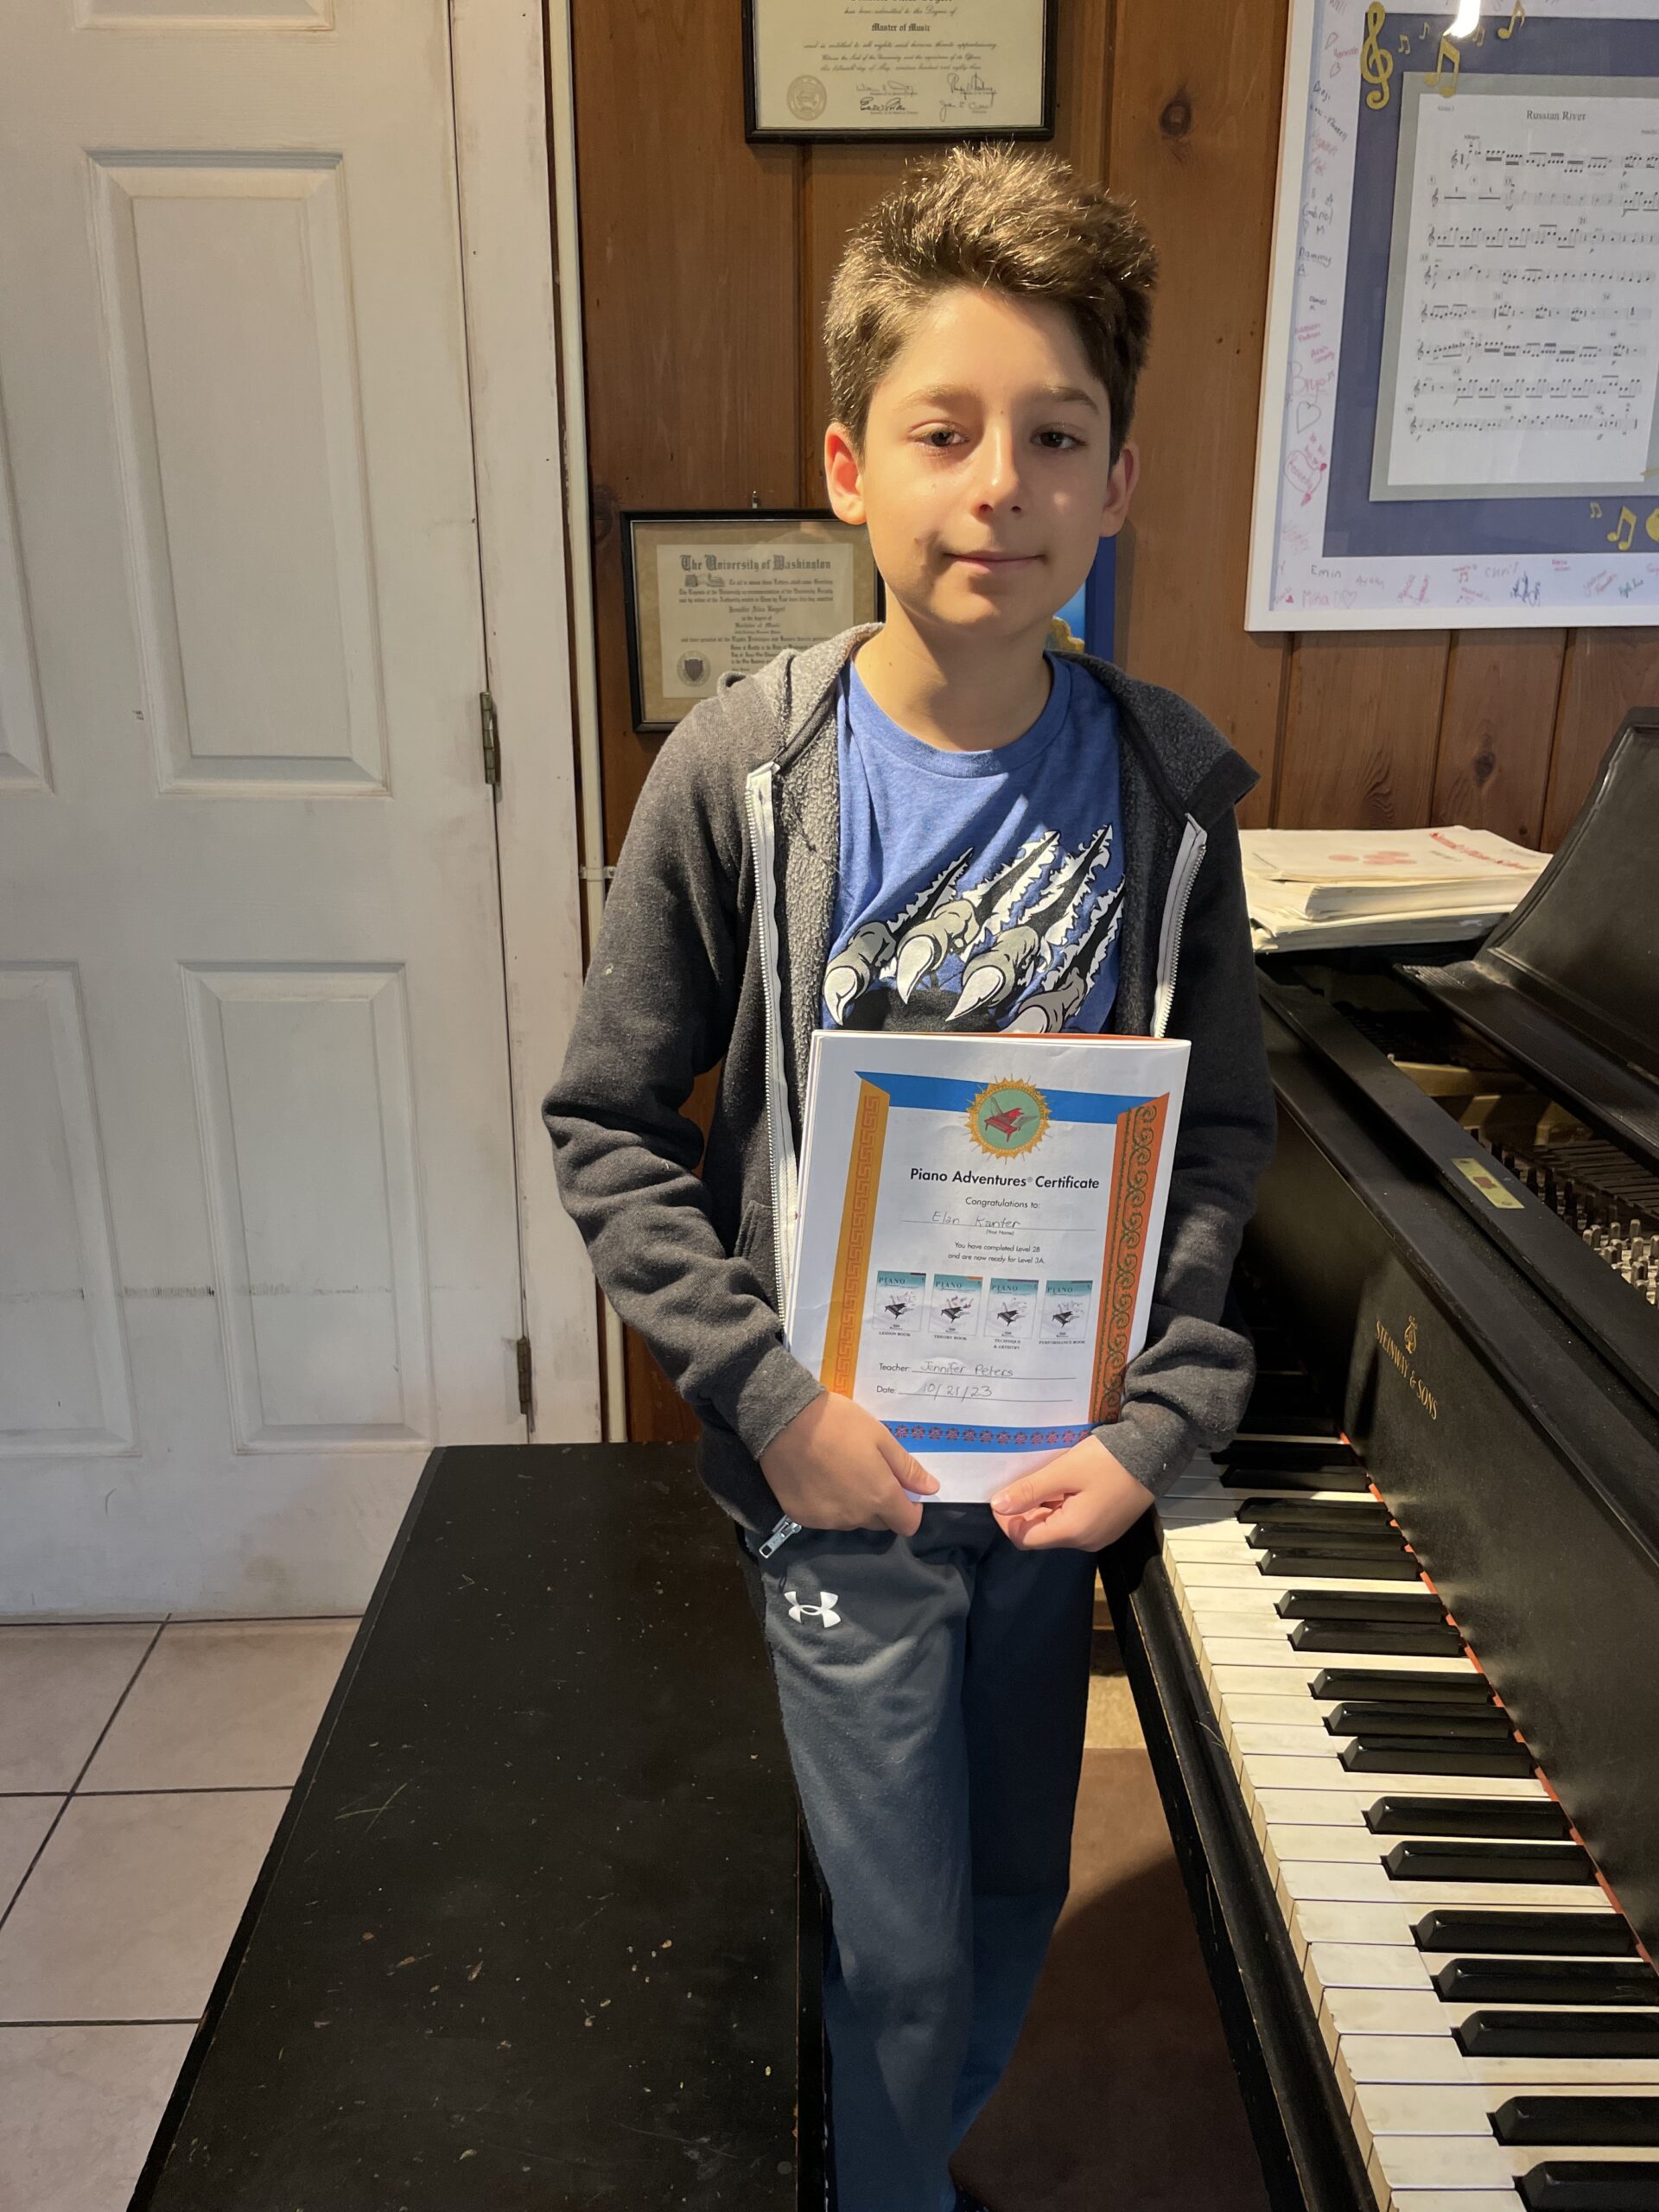 Boy holding piano certificate